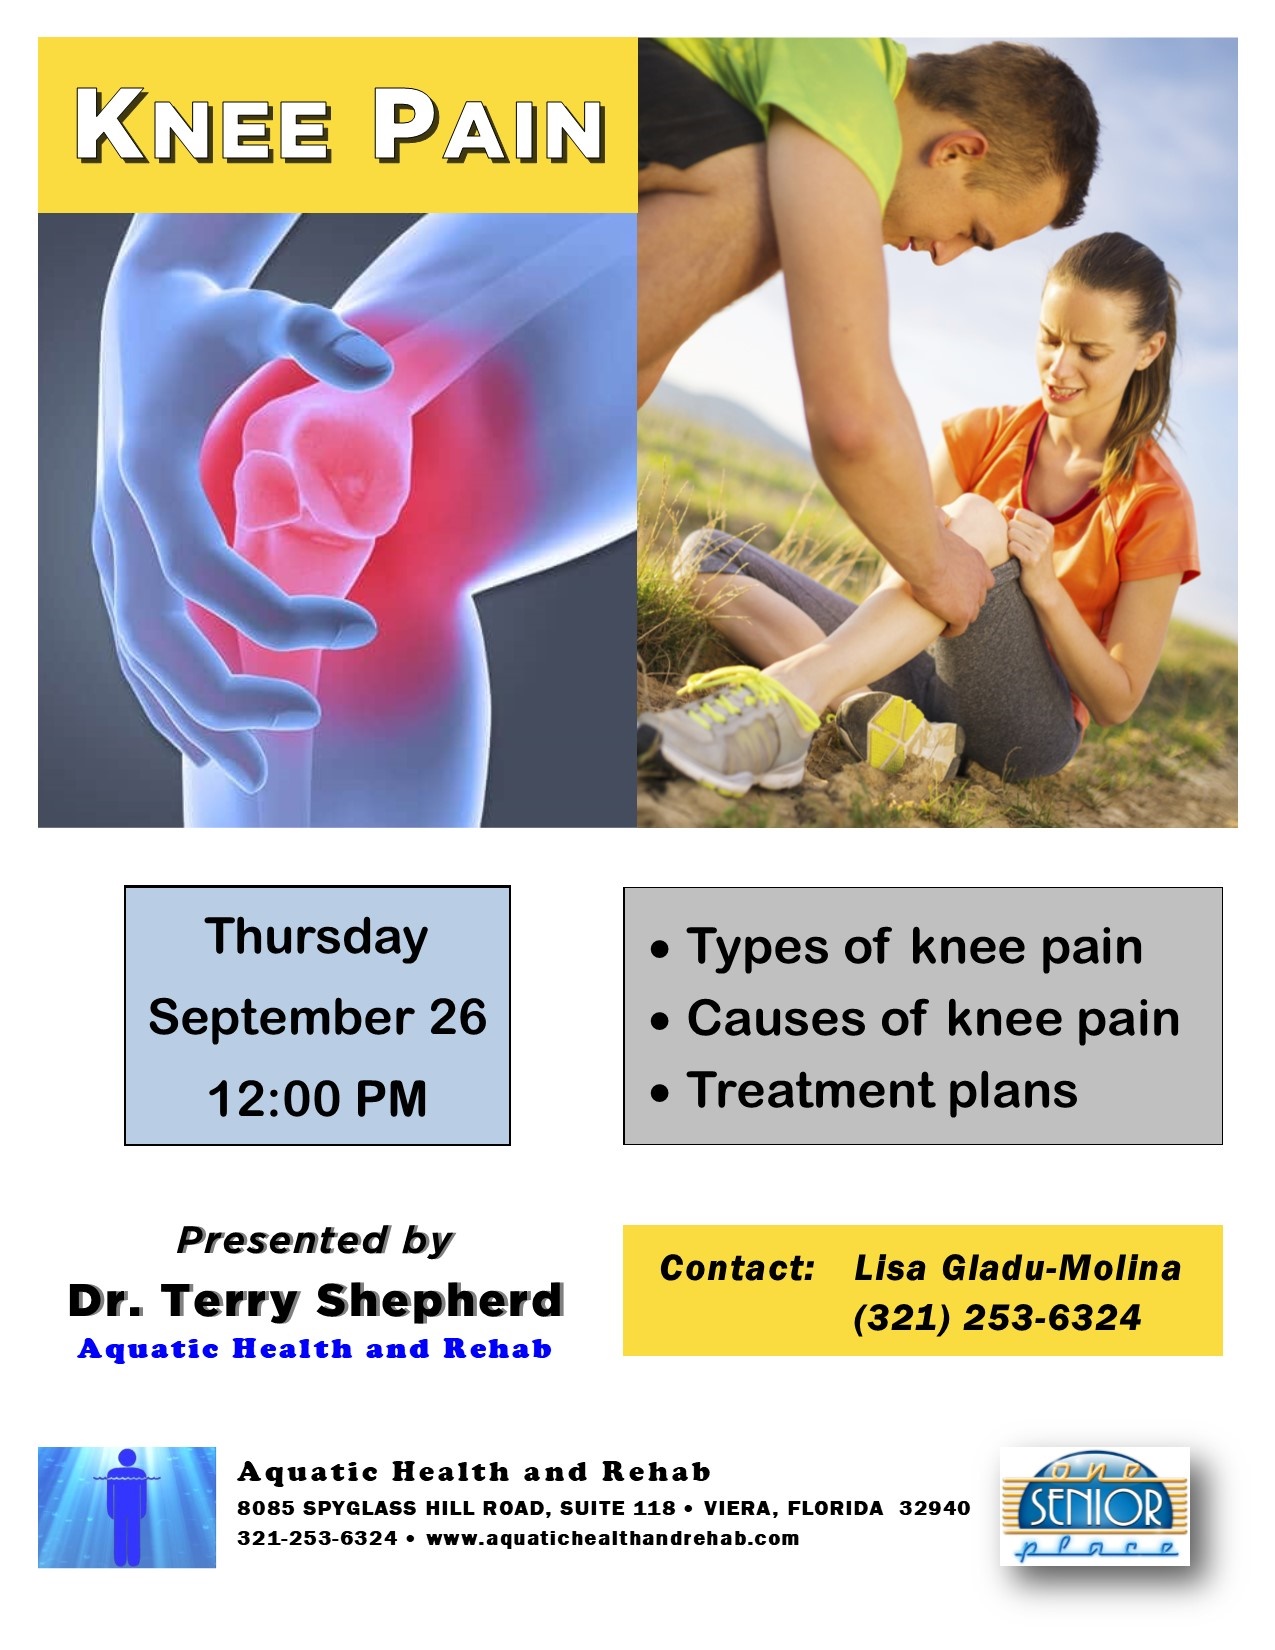 Knee Pain presented by Aquatic Health and Rehab